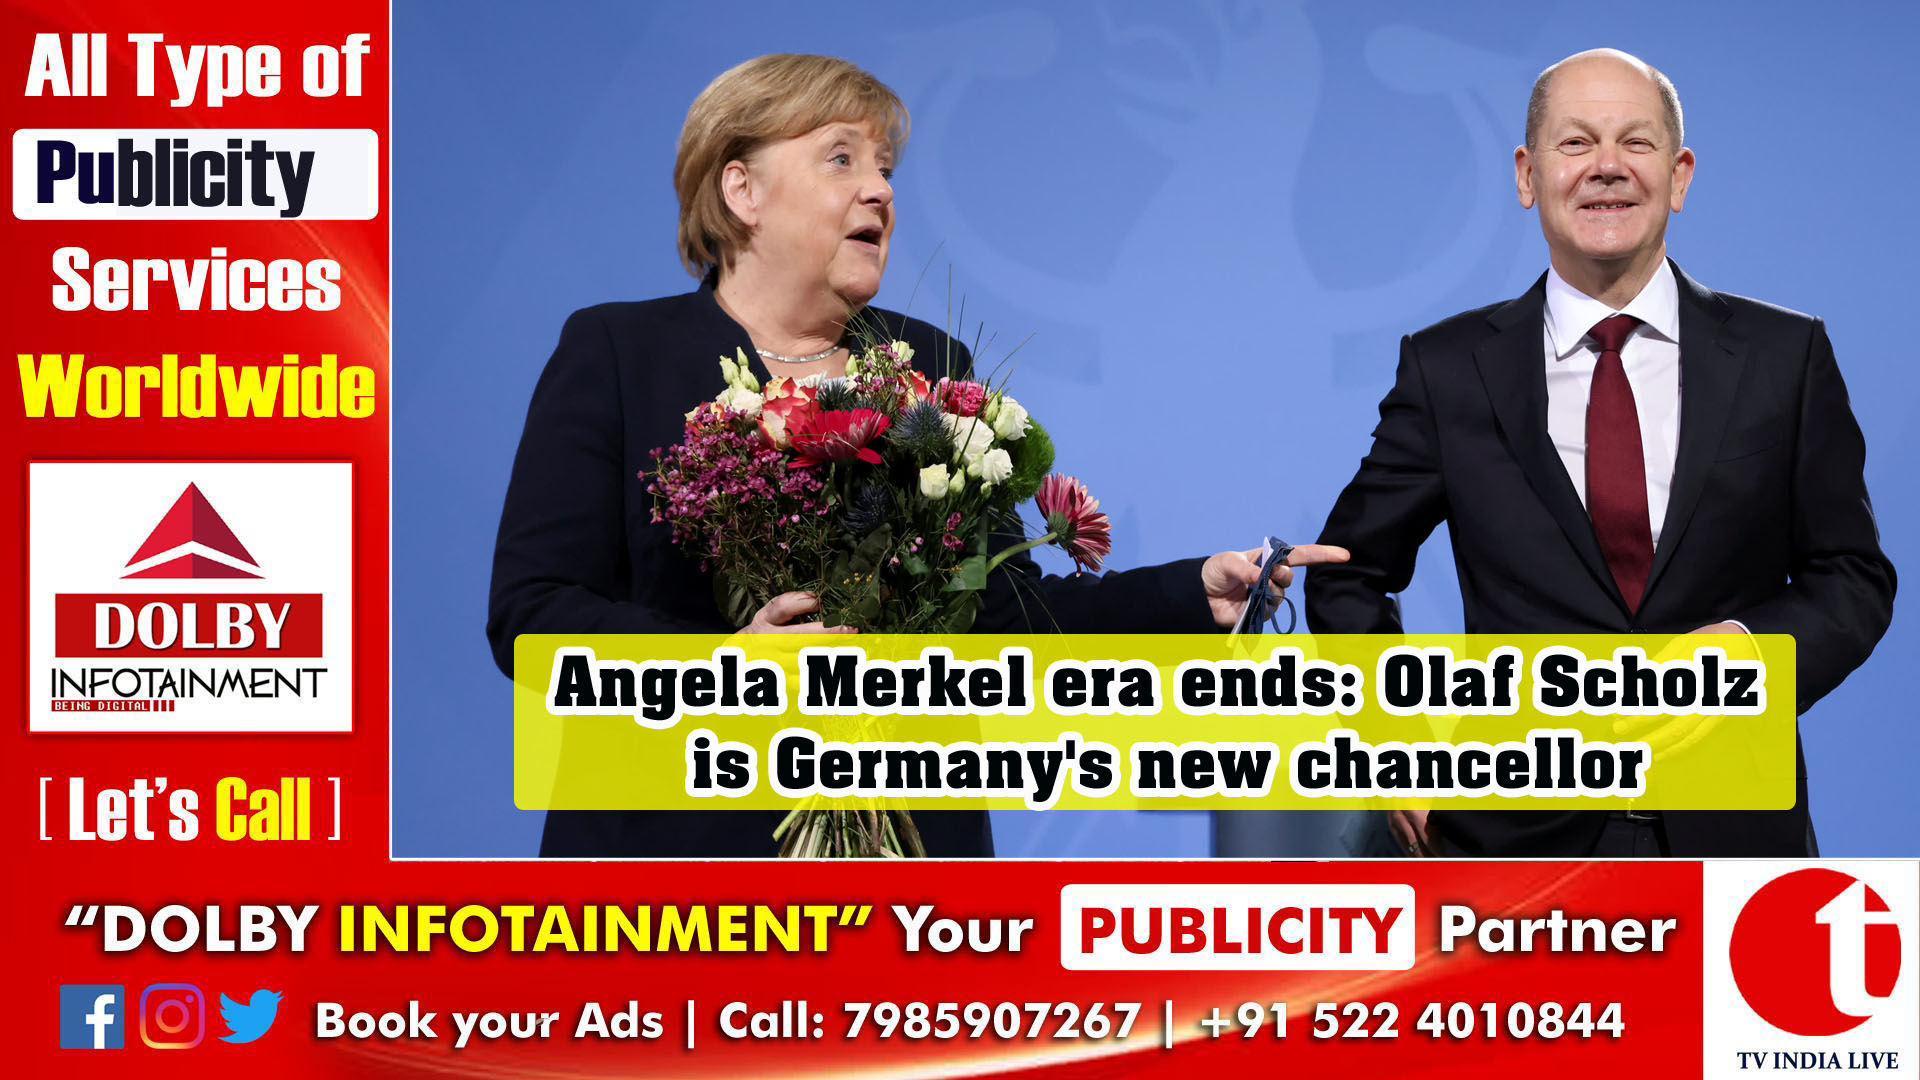 Merkel era ends: Olaf Scholz is Germany's new chancellor